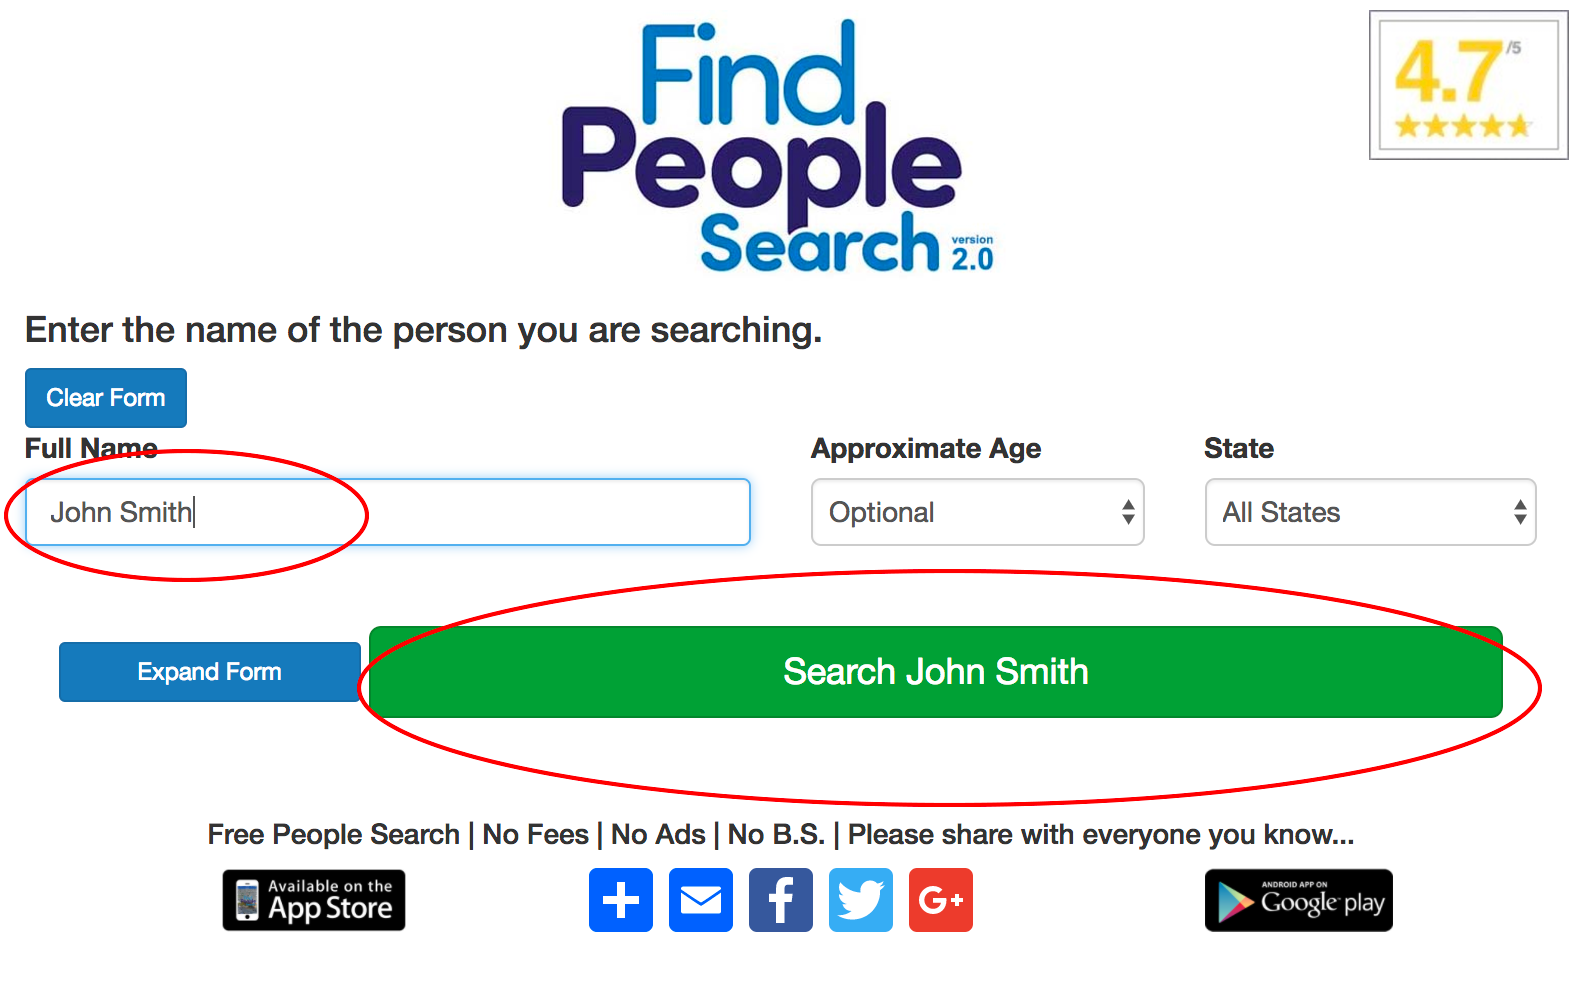 Find People Search Customer Service